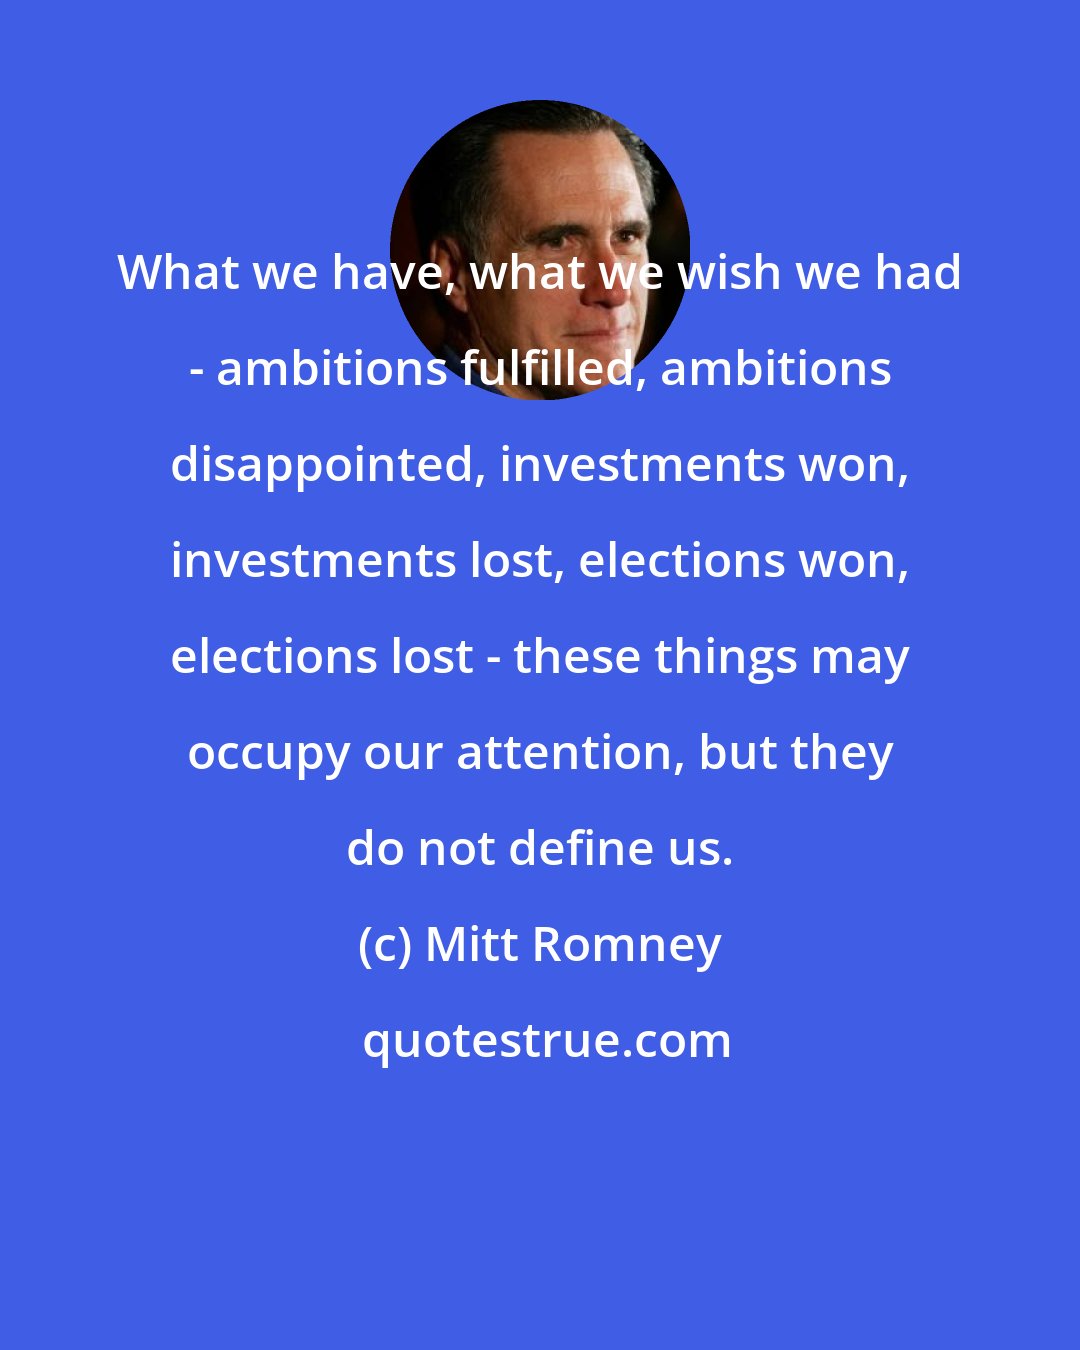 Mitt Romney: What we have, what we wish we had - ambitions fulfilled, ambitions disappointed, investments won, investments lost, elections won, elections lost - these things may occupy our attention, but they do not define us.